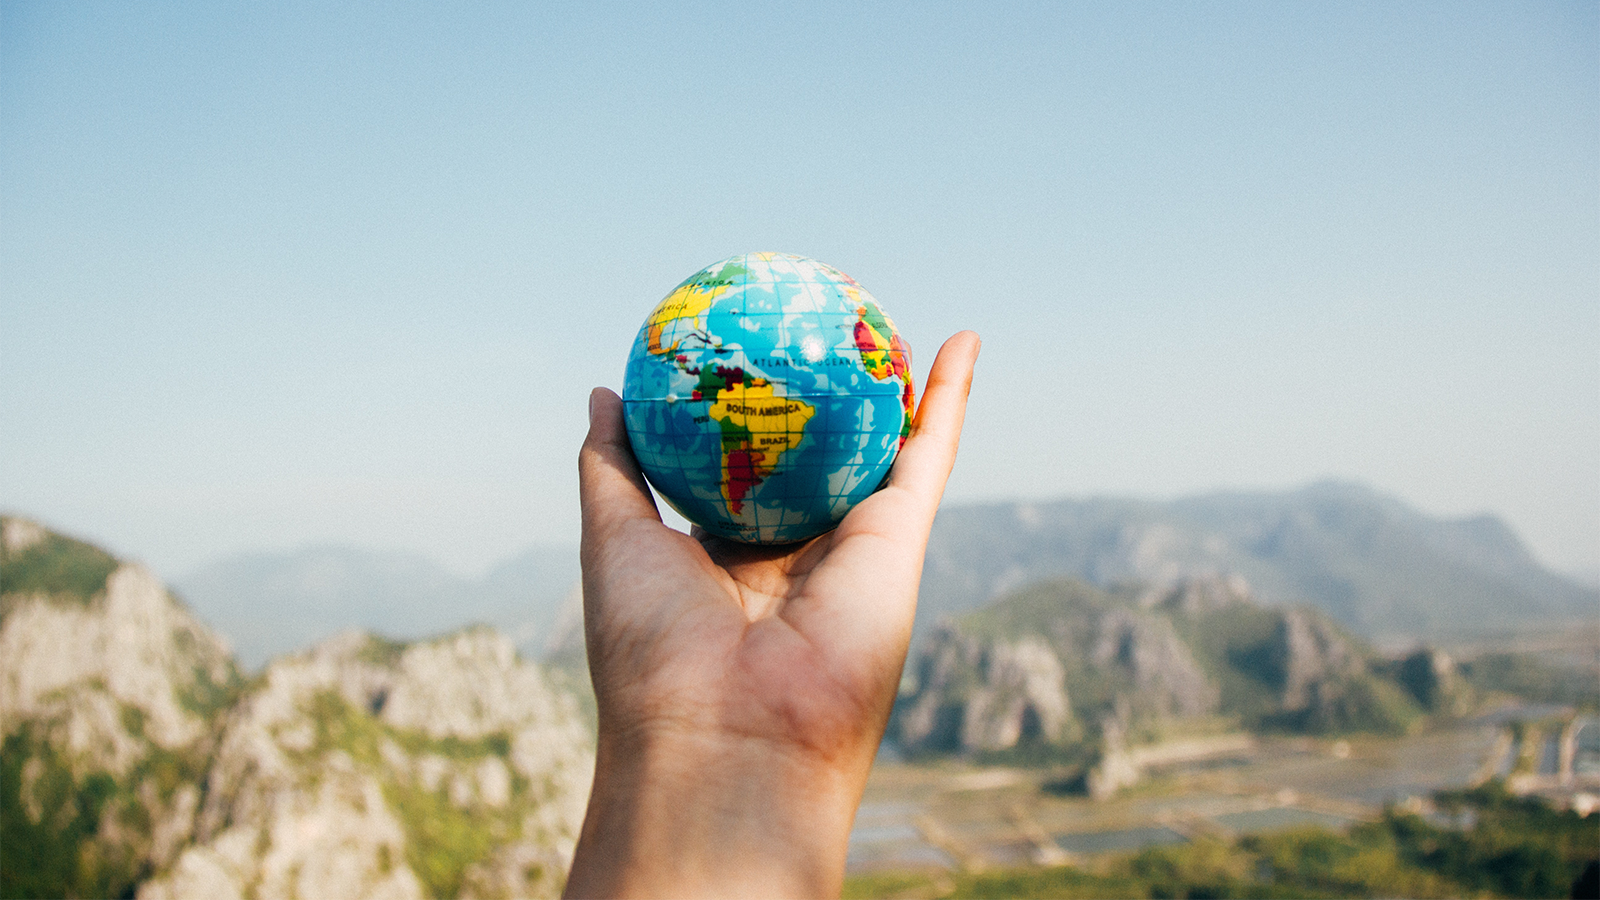 hand holding a mini globe up in front of a scenic landscape